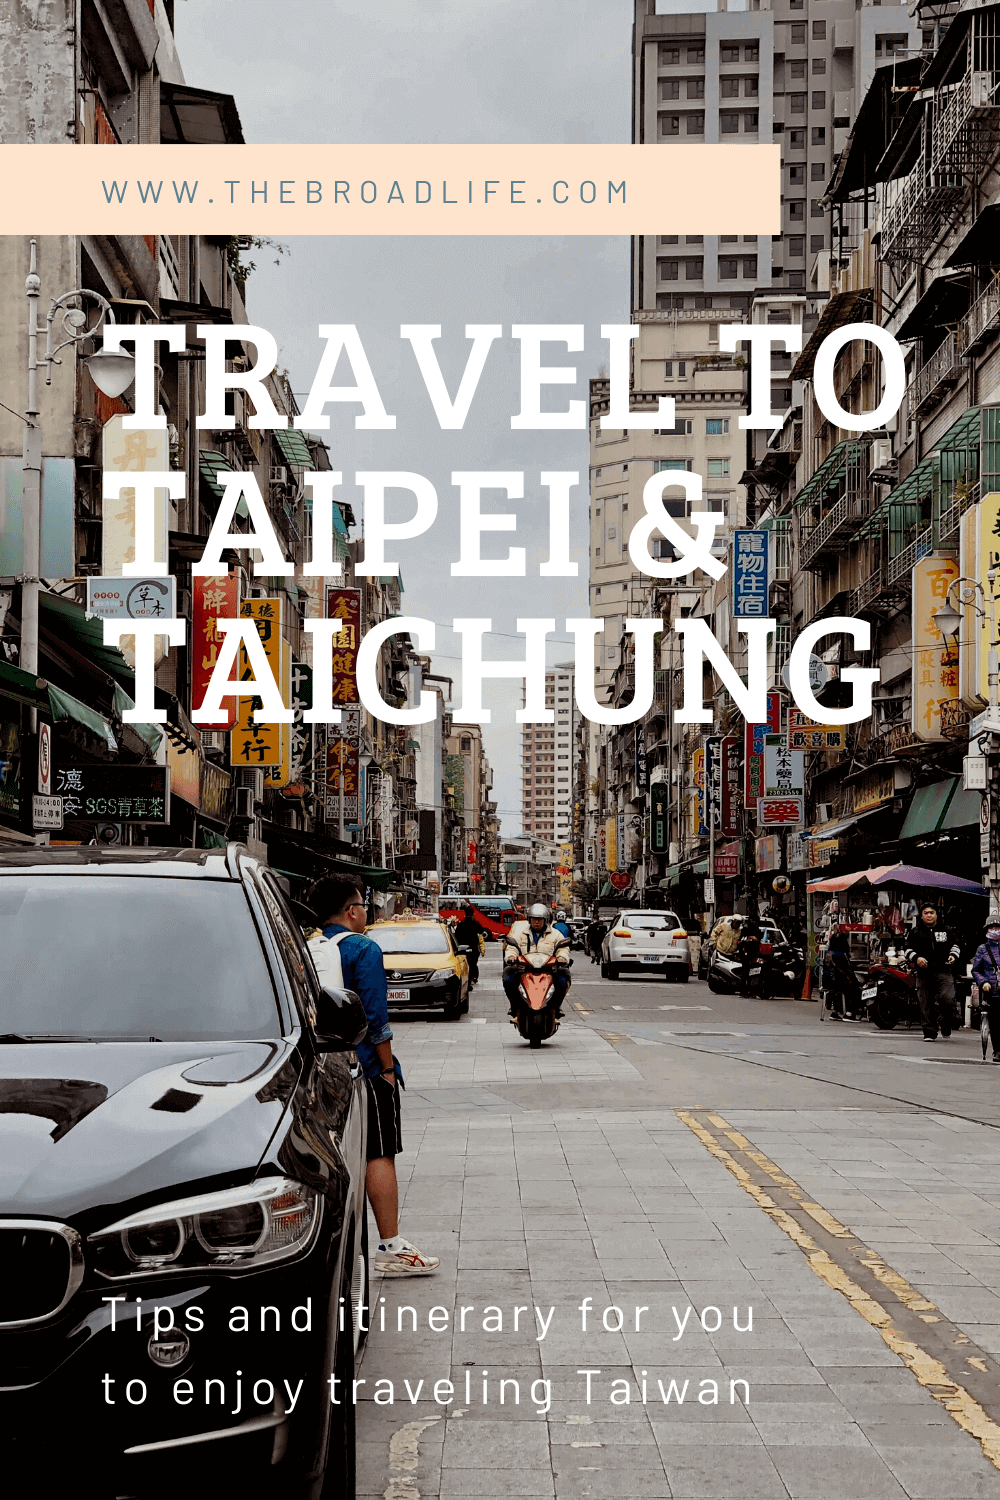 Pinterest Board of 5D4N Travel to Taipei and Taichung - The Broad Life